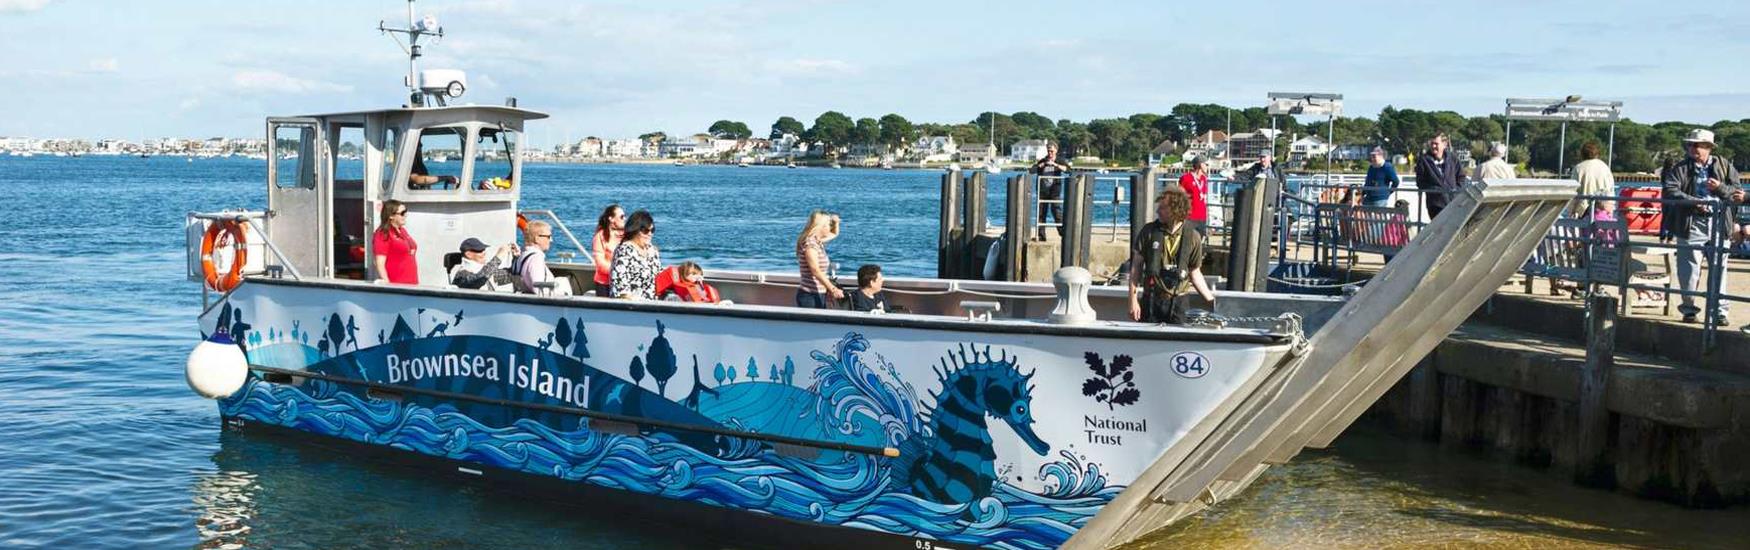 NT Brownsea Seahorse giving wheelchair access to the island